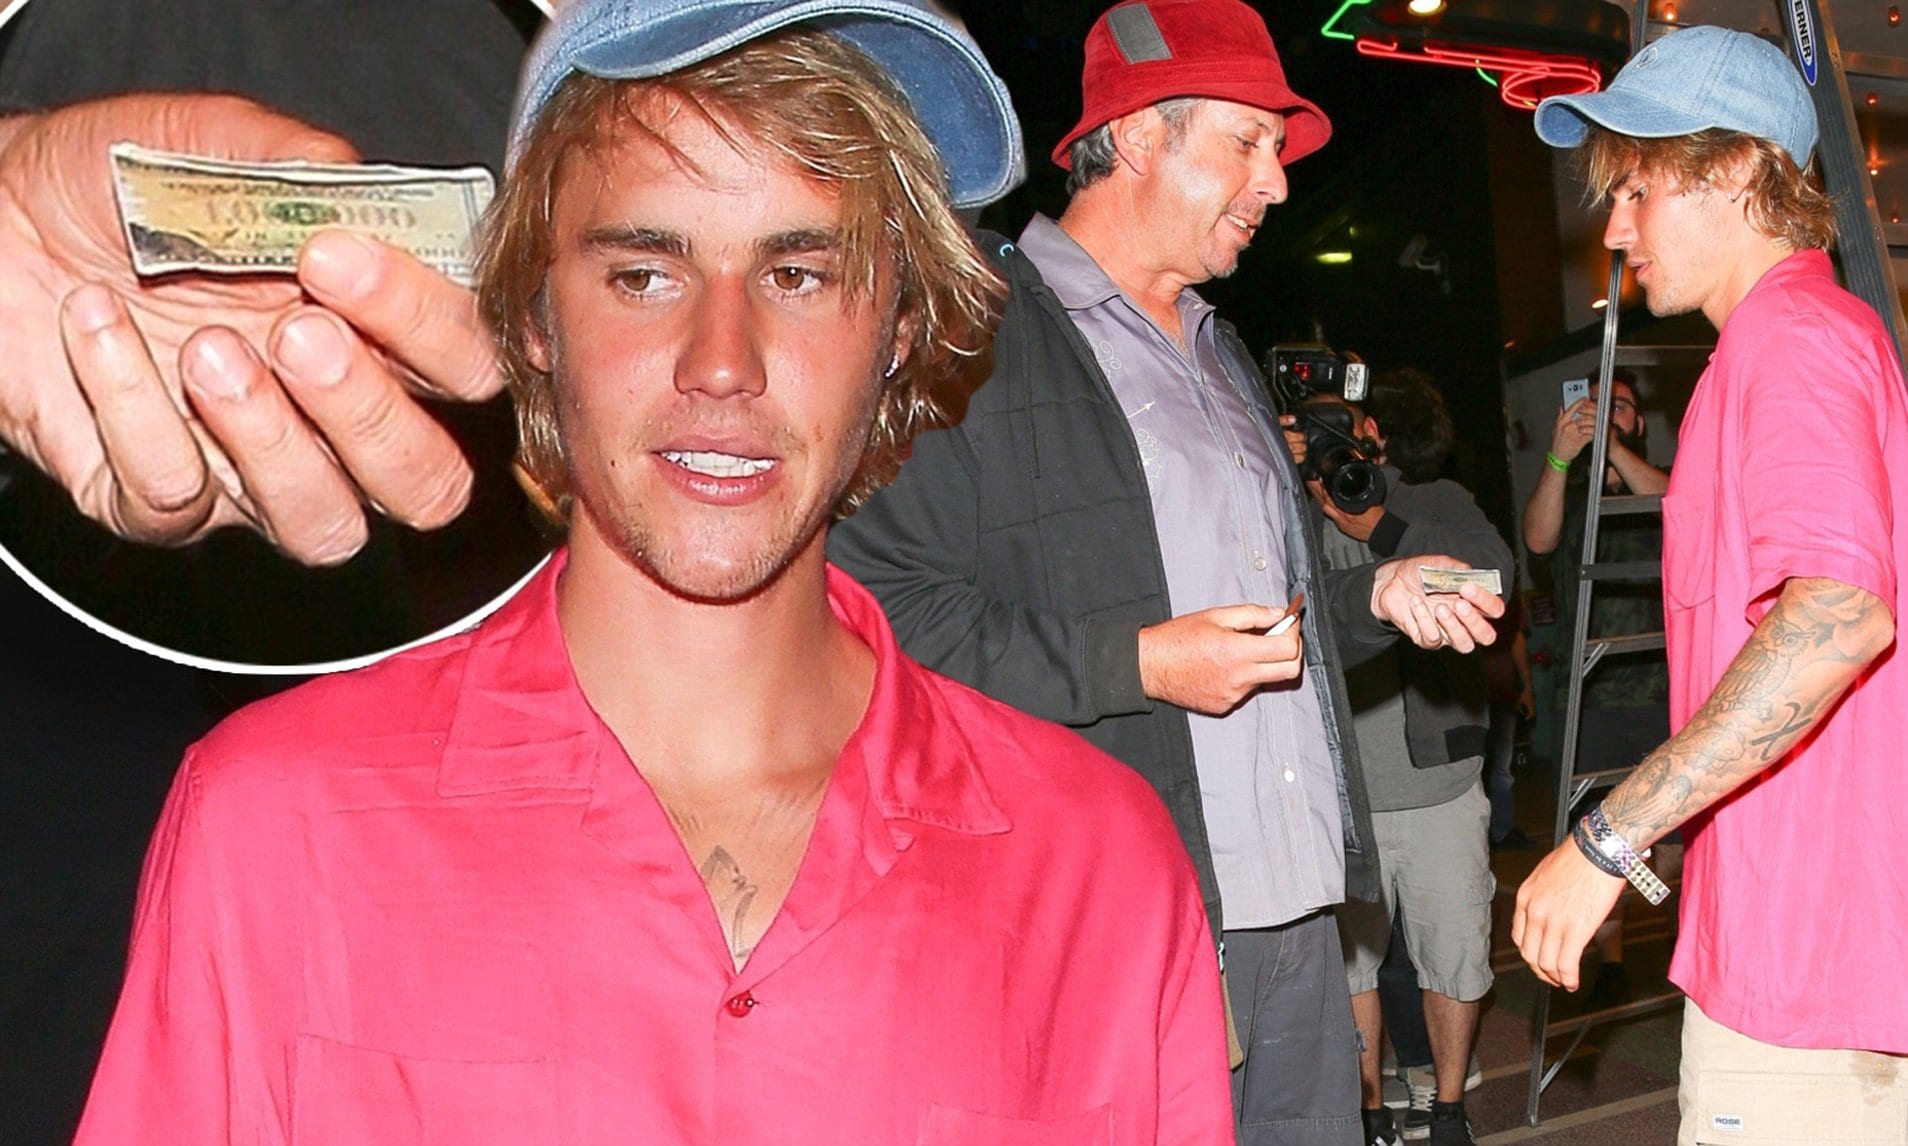 Justin Bieber has incident with fan who hands him a FAKE $100 bill D